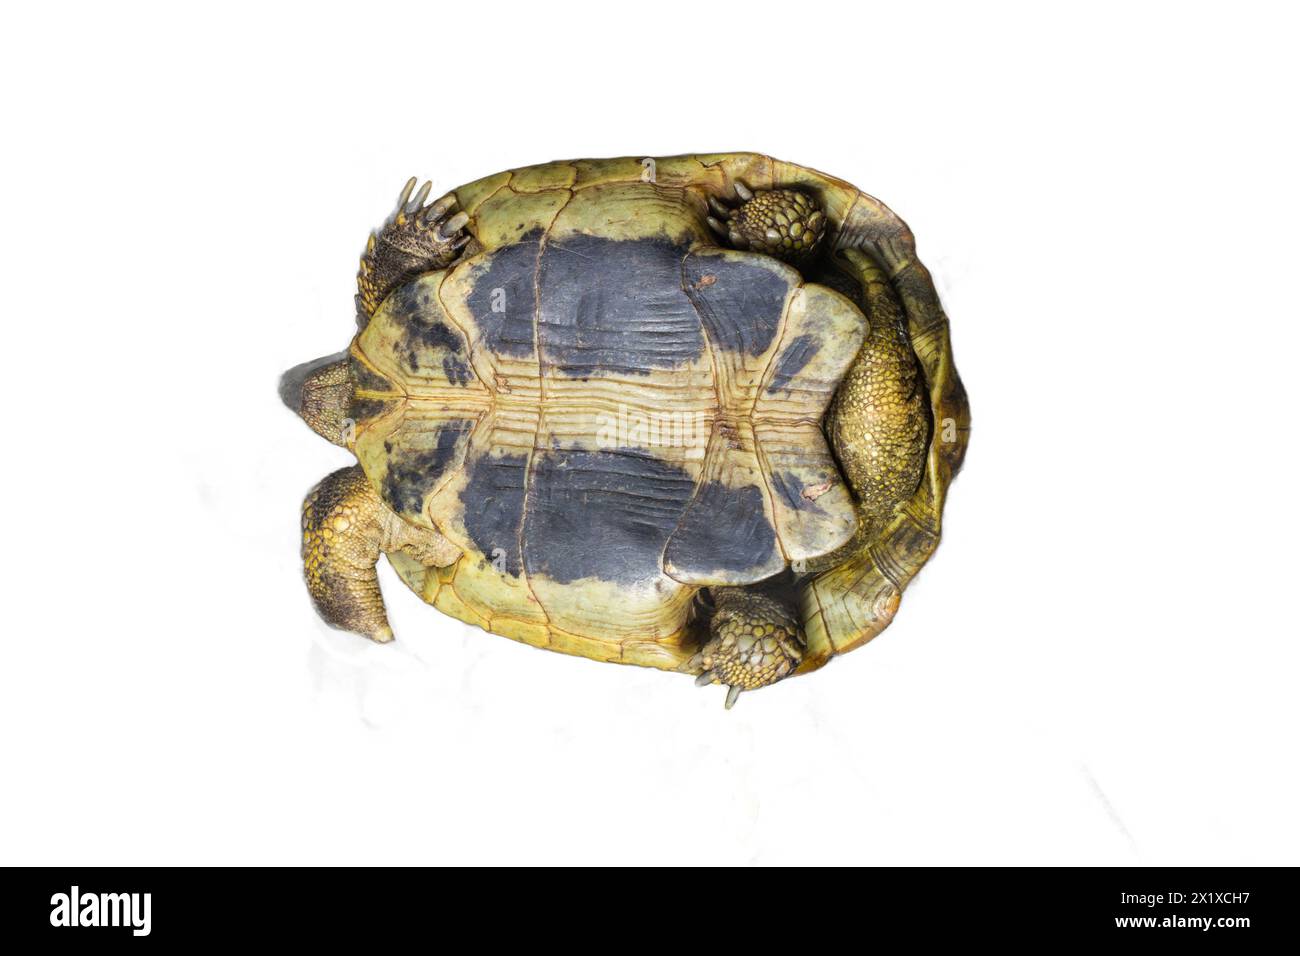 The underside of a tortoise isolated on a transparent background. Ideal for educational illustrations, zoology projects, and wildlife designs. Stock Photo